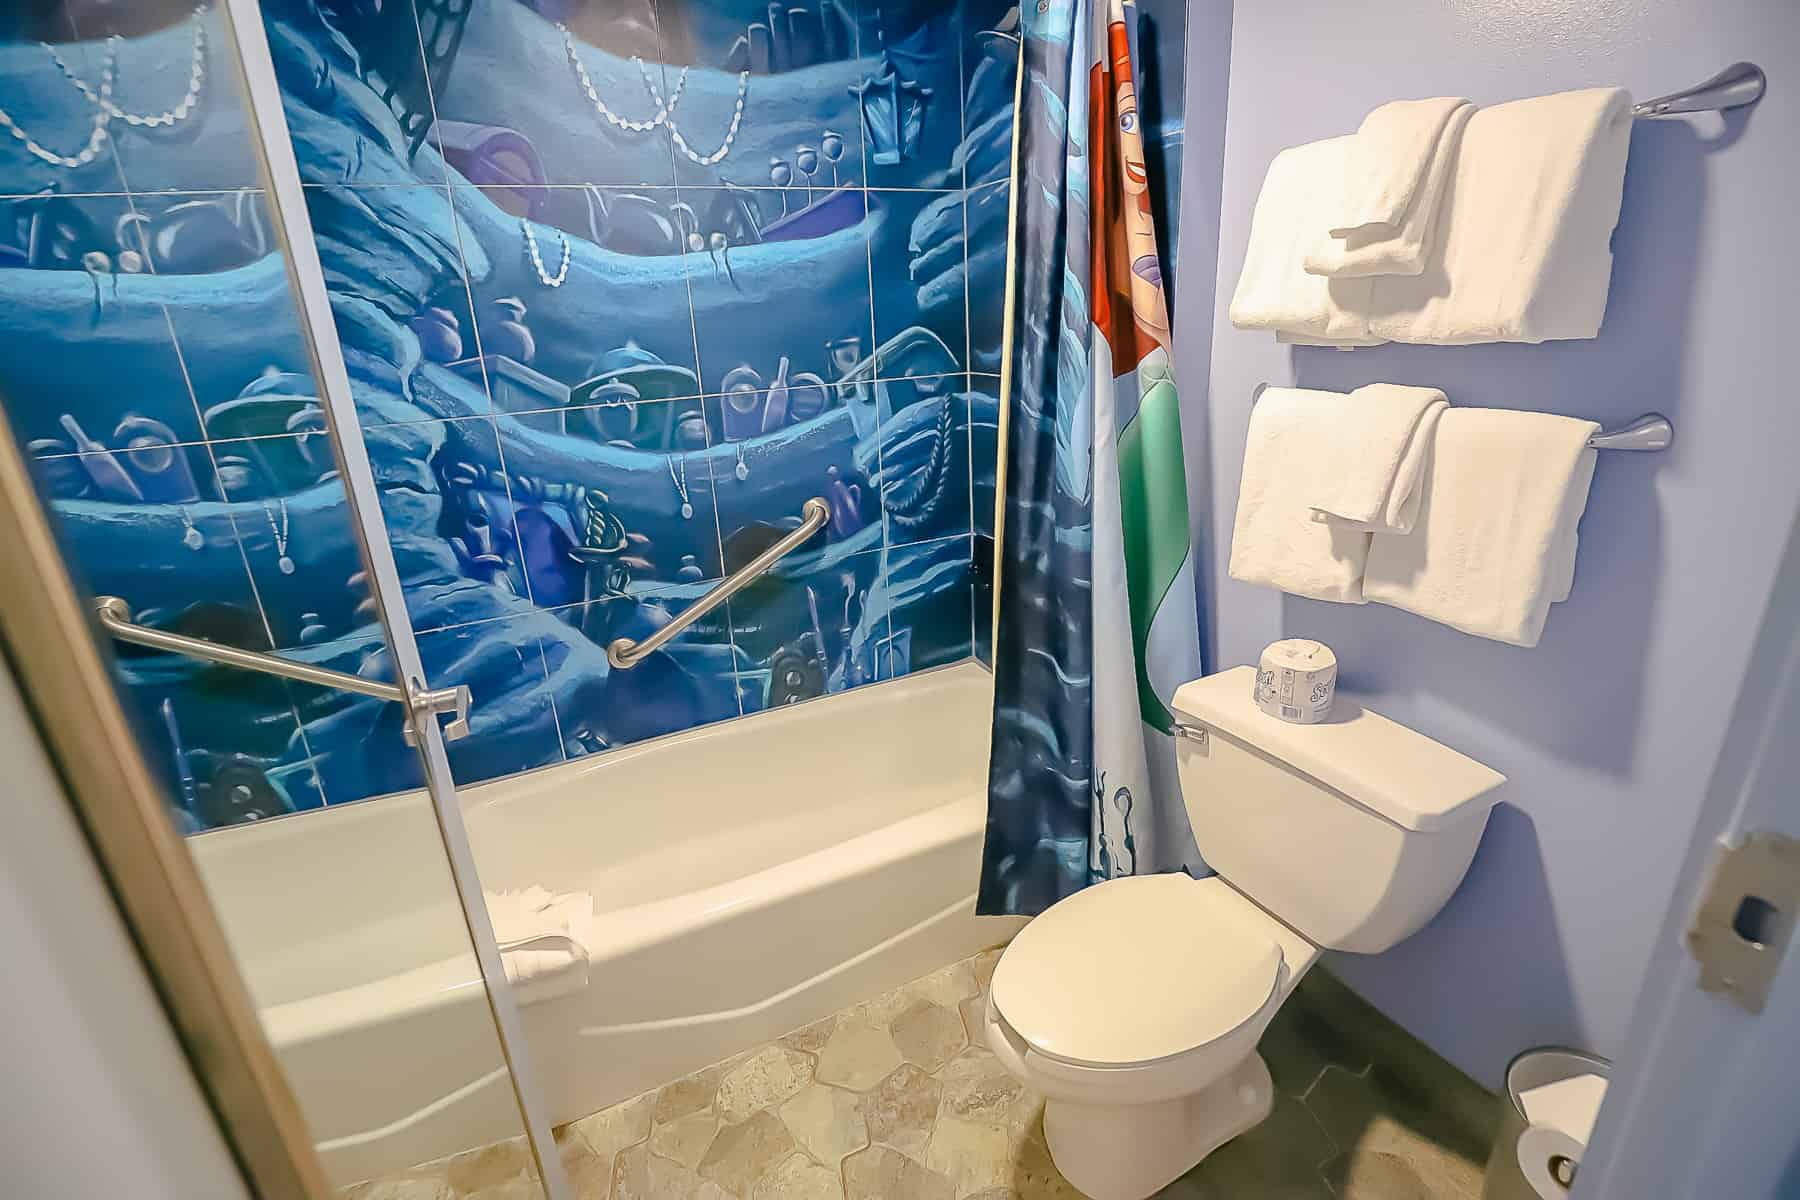 the interior of the tub with shower is painted to look like Ariel's treasure trove 